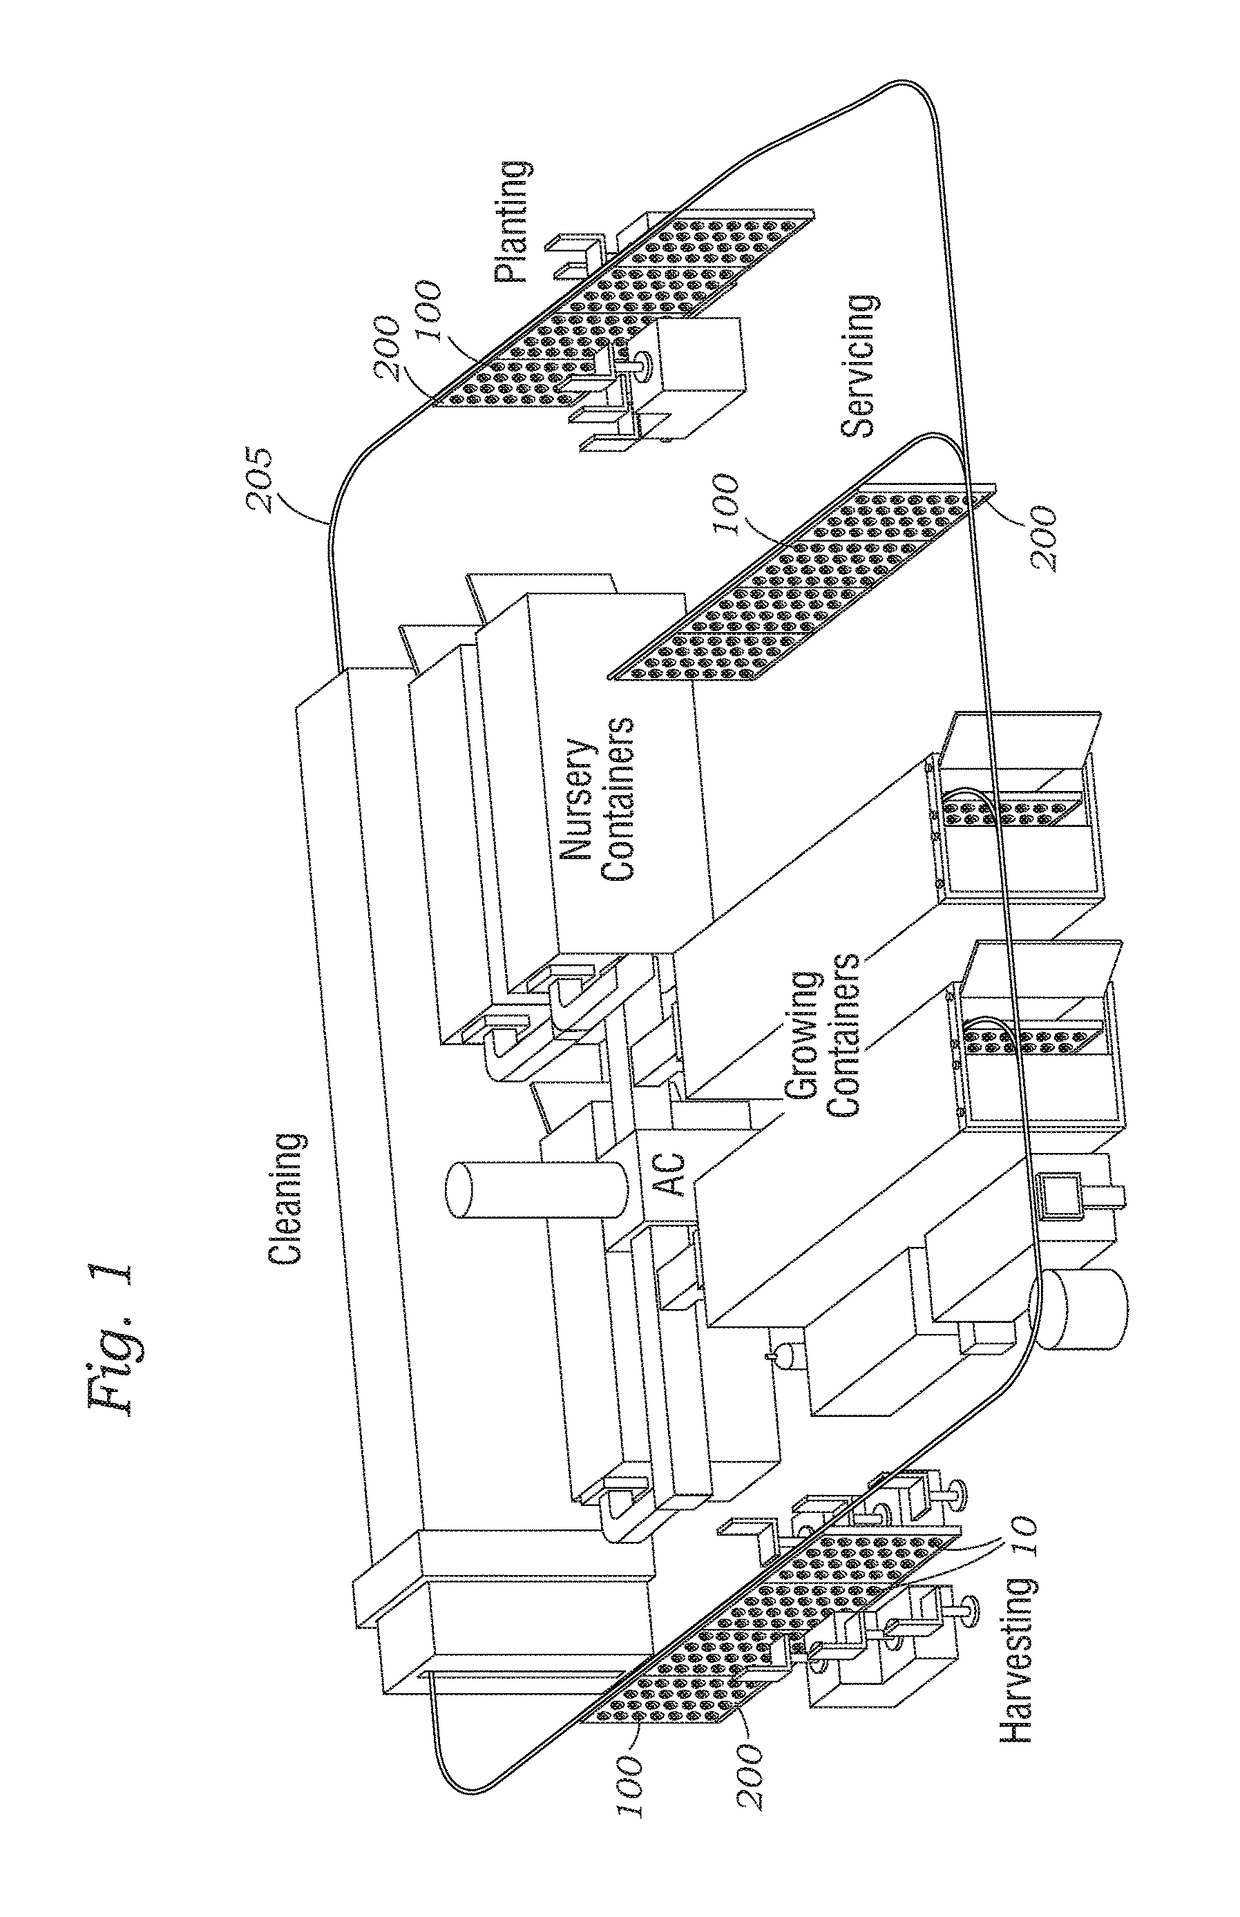 Plant growing systems and methods